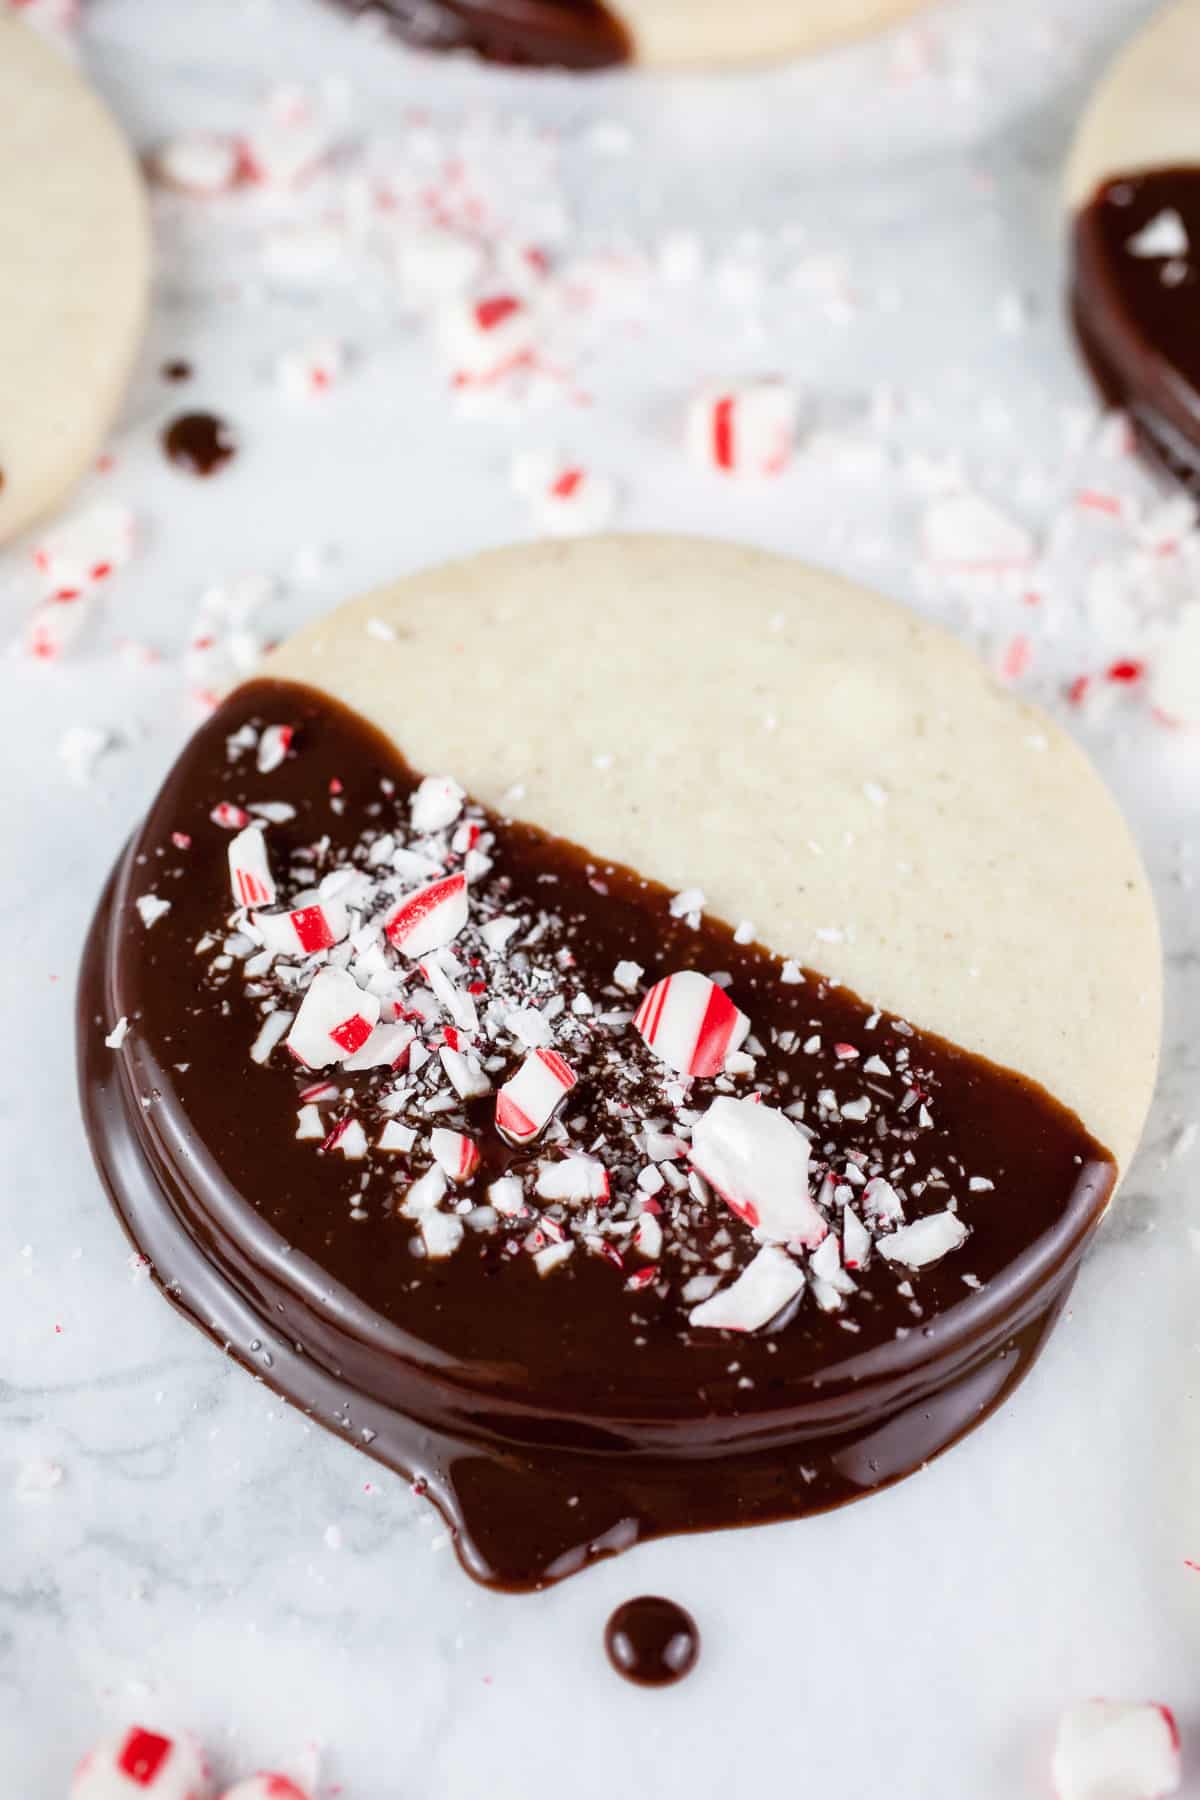 Chocolate dipped peppermint shortbread cookies with peppermint candies.